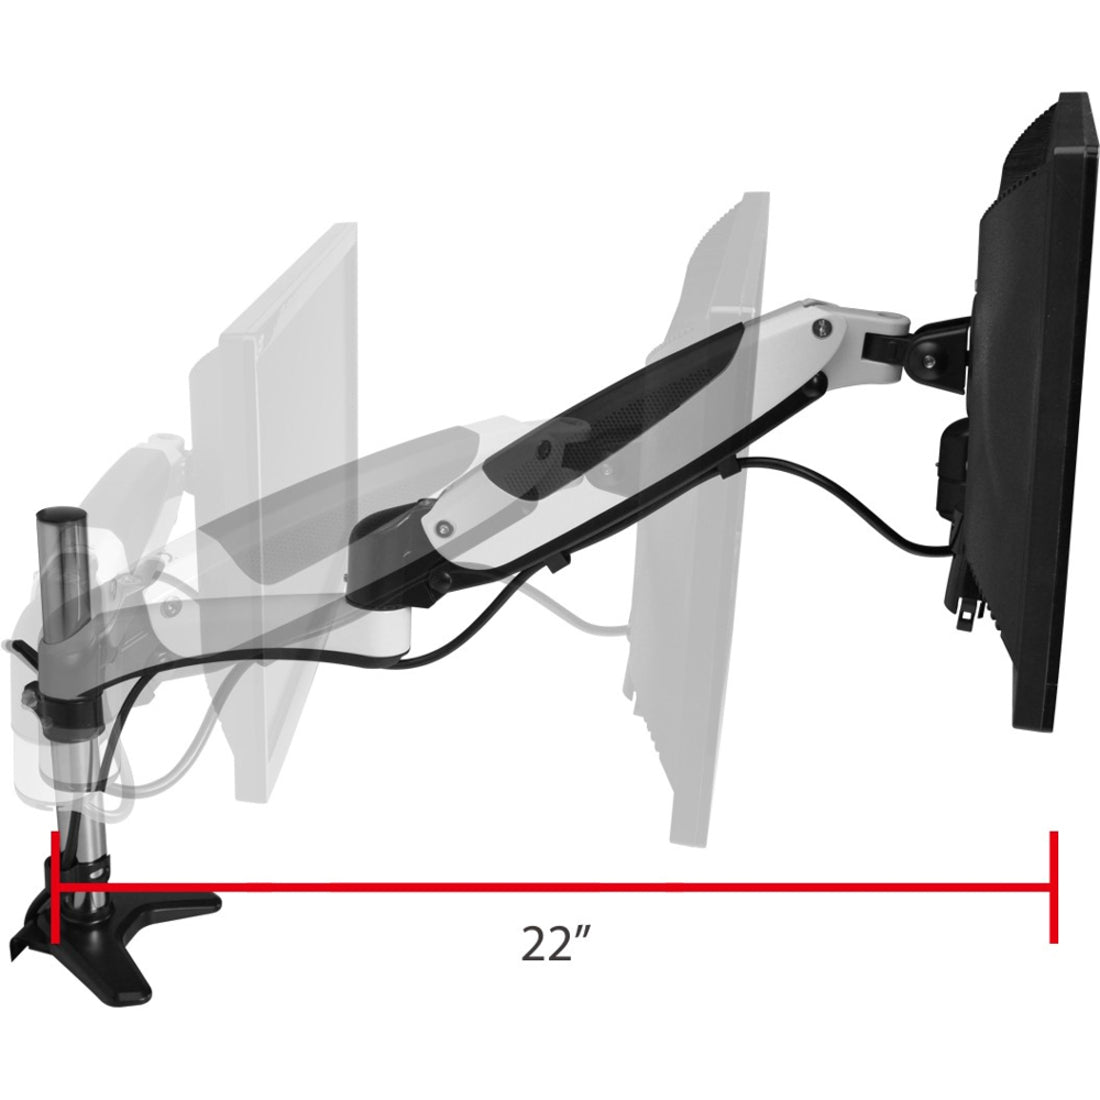 SIIG CE-MT1H12-S1 Full-Motion Easy Access Single Monitor Desk Mount - White, Adjustable Viewing Angle, 3 Year Warranty